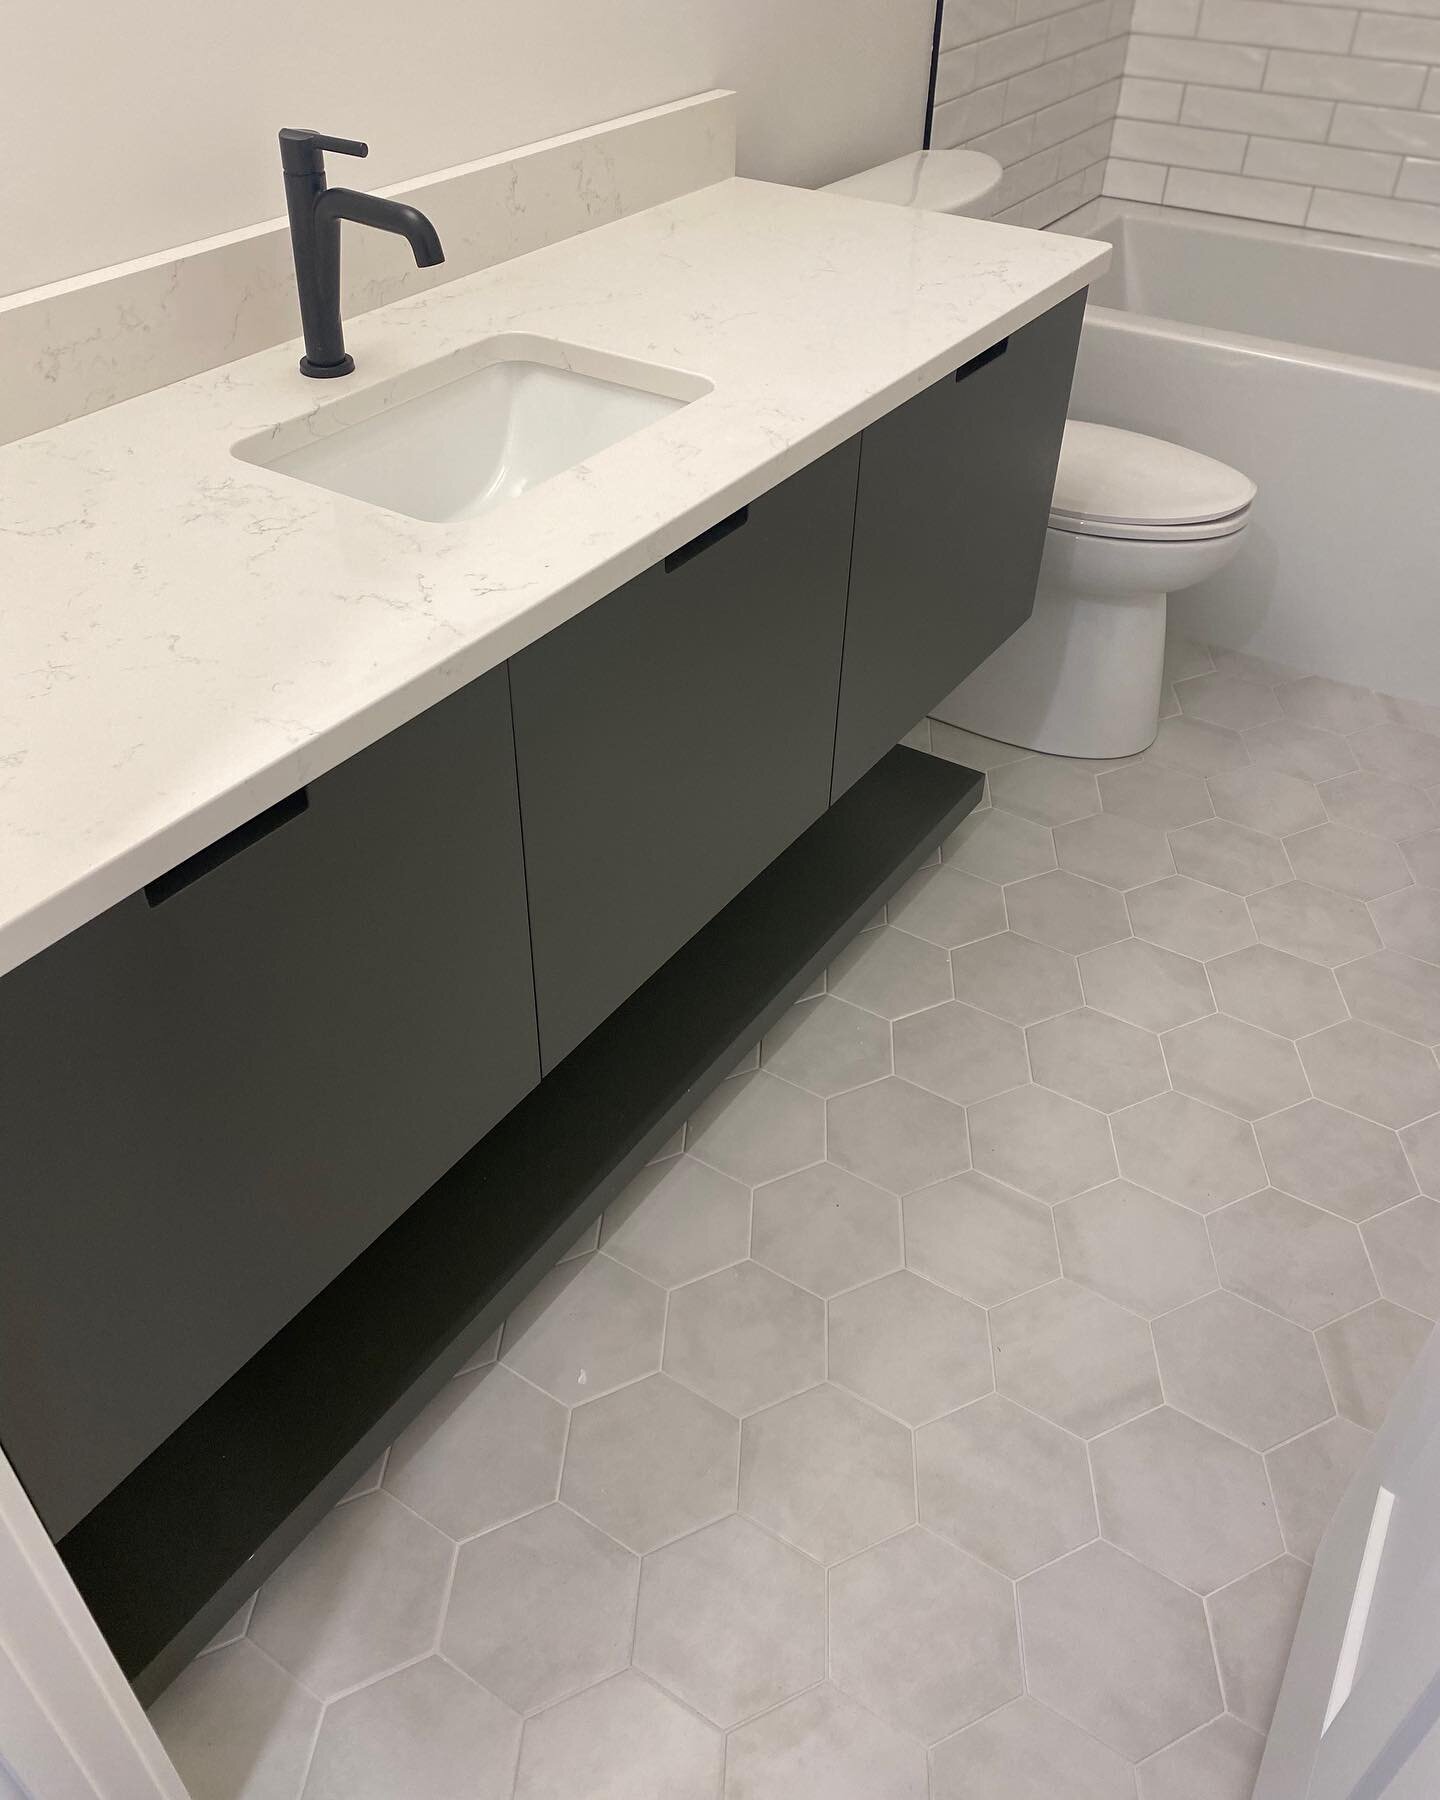 The Modern Mountain Guest Bathroom. Sit down &amp; stay a while&hellip;&hellip;.😉

Hexagons are such a great shape. Adding shapes and pattern like hex tiles, dark grout lines and even coloured tiles, gives a space interest and the POP it needs. 

We